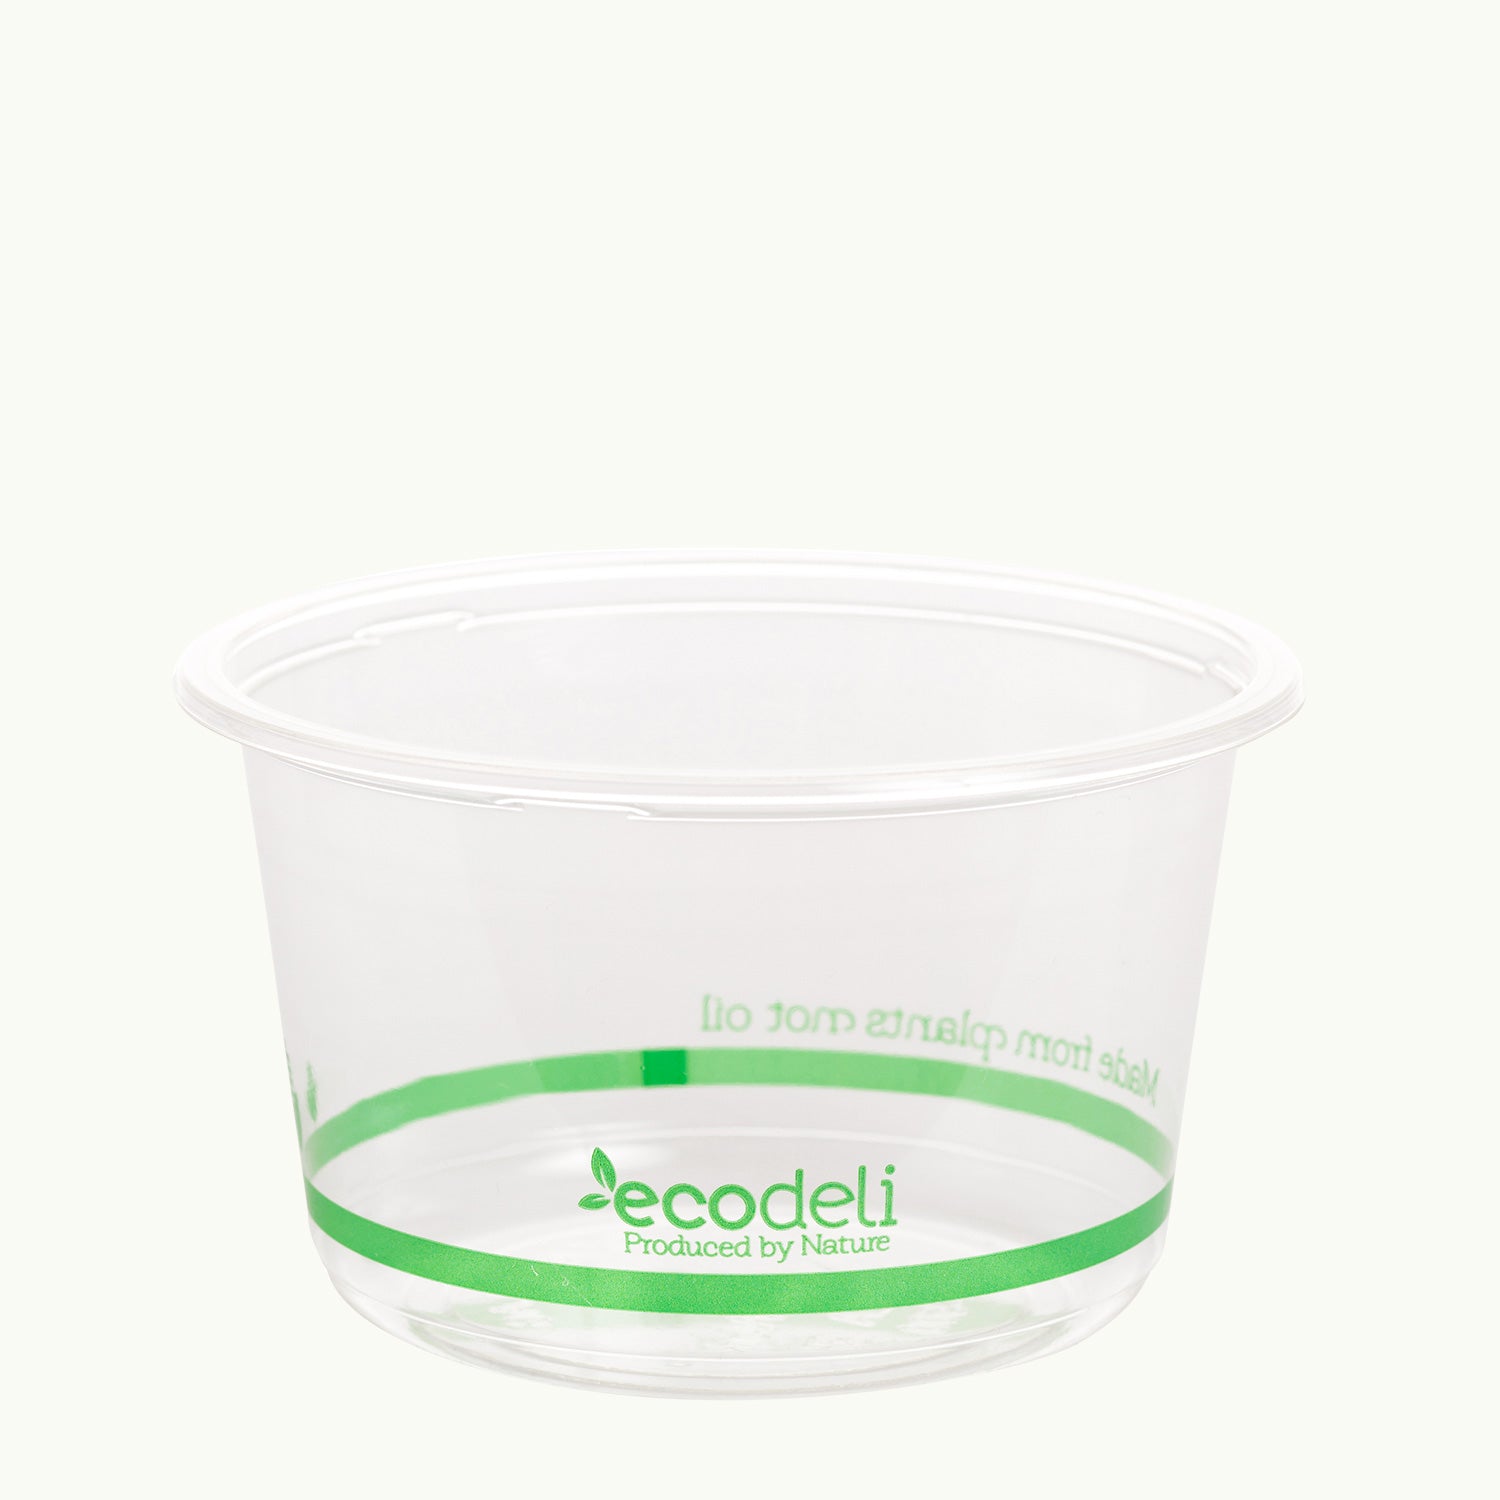 Ecoware clear takeaway container 360ml.